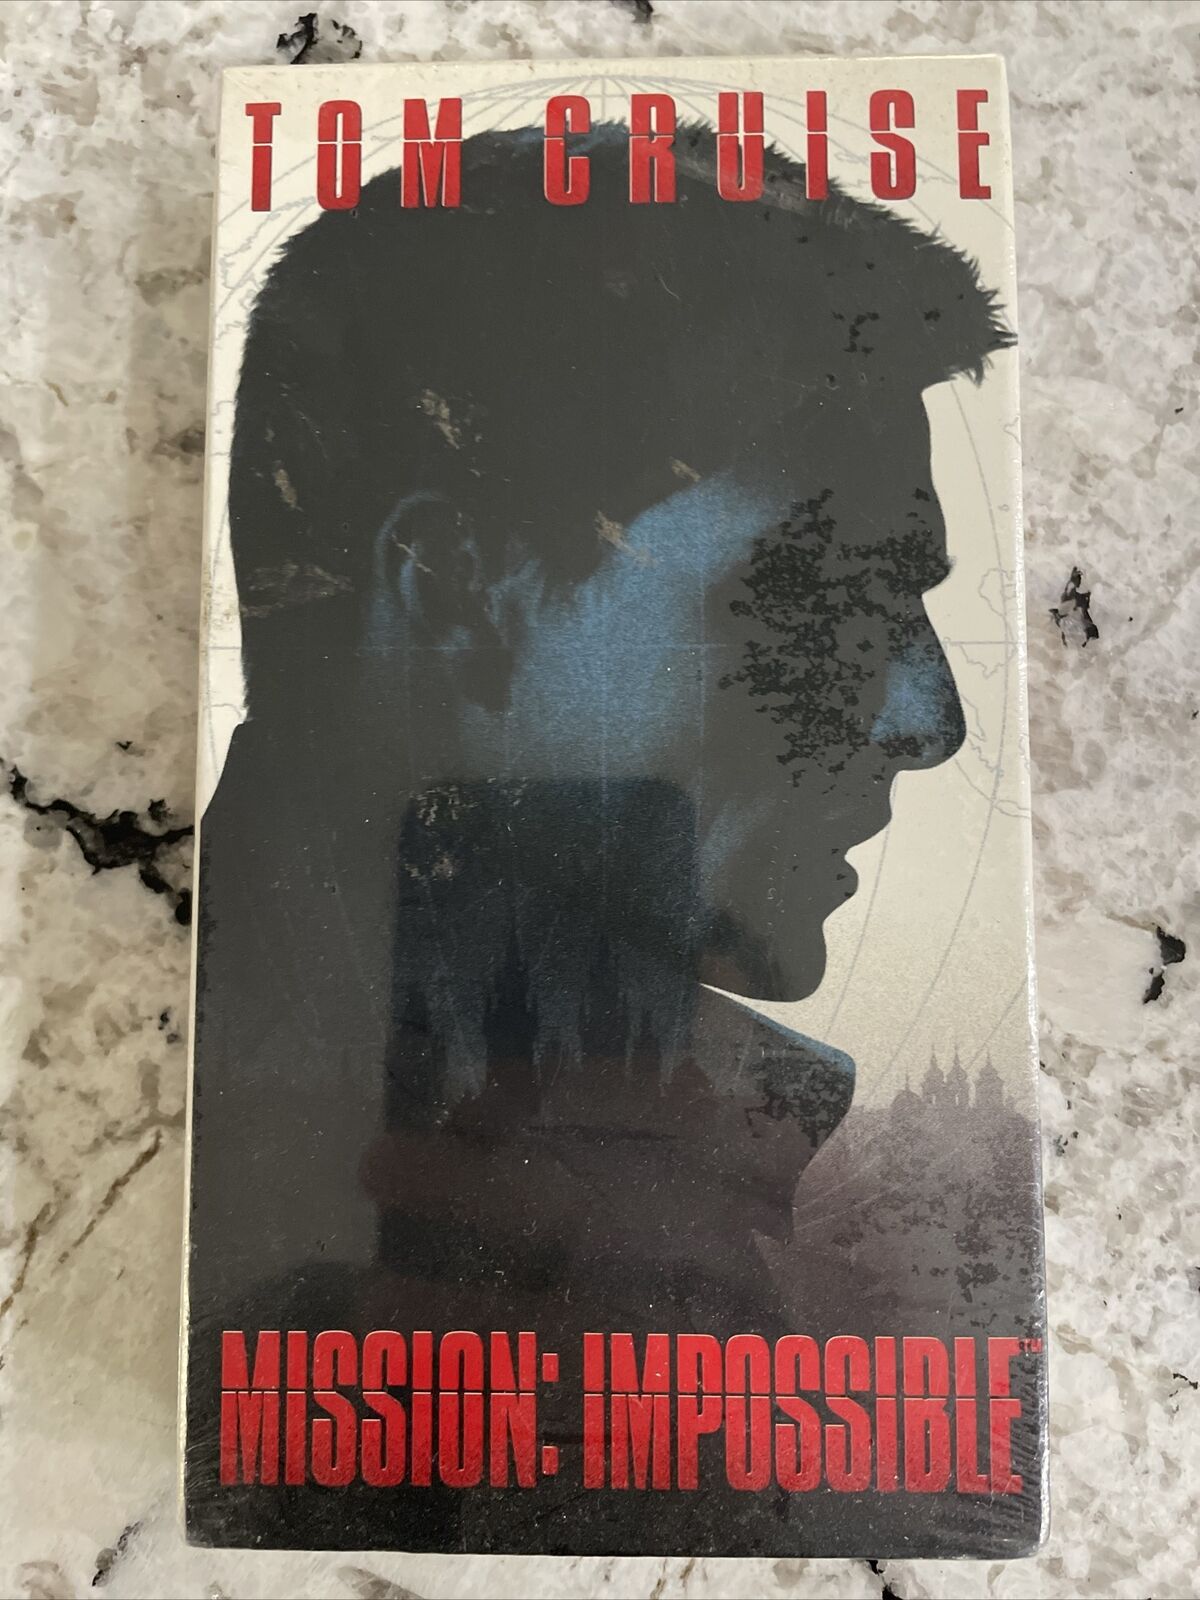 Mission Impossible Vhs Jon Voight, Tom Cruise Brand New Sealed